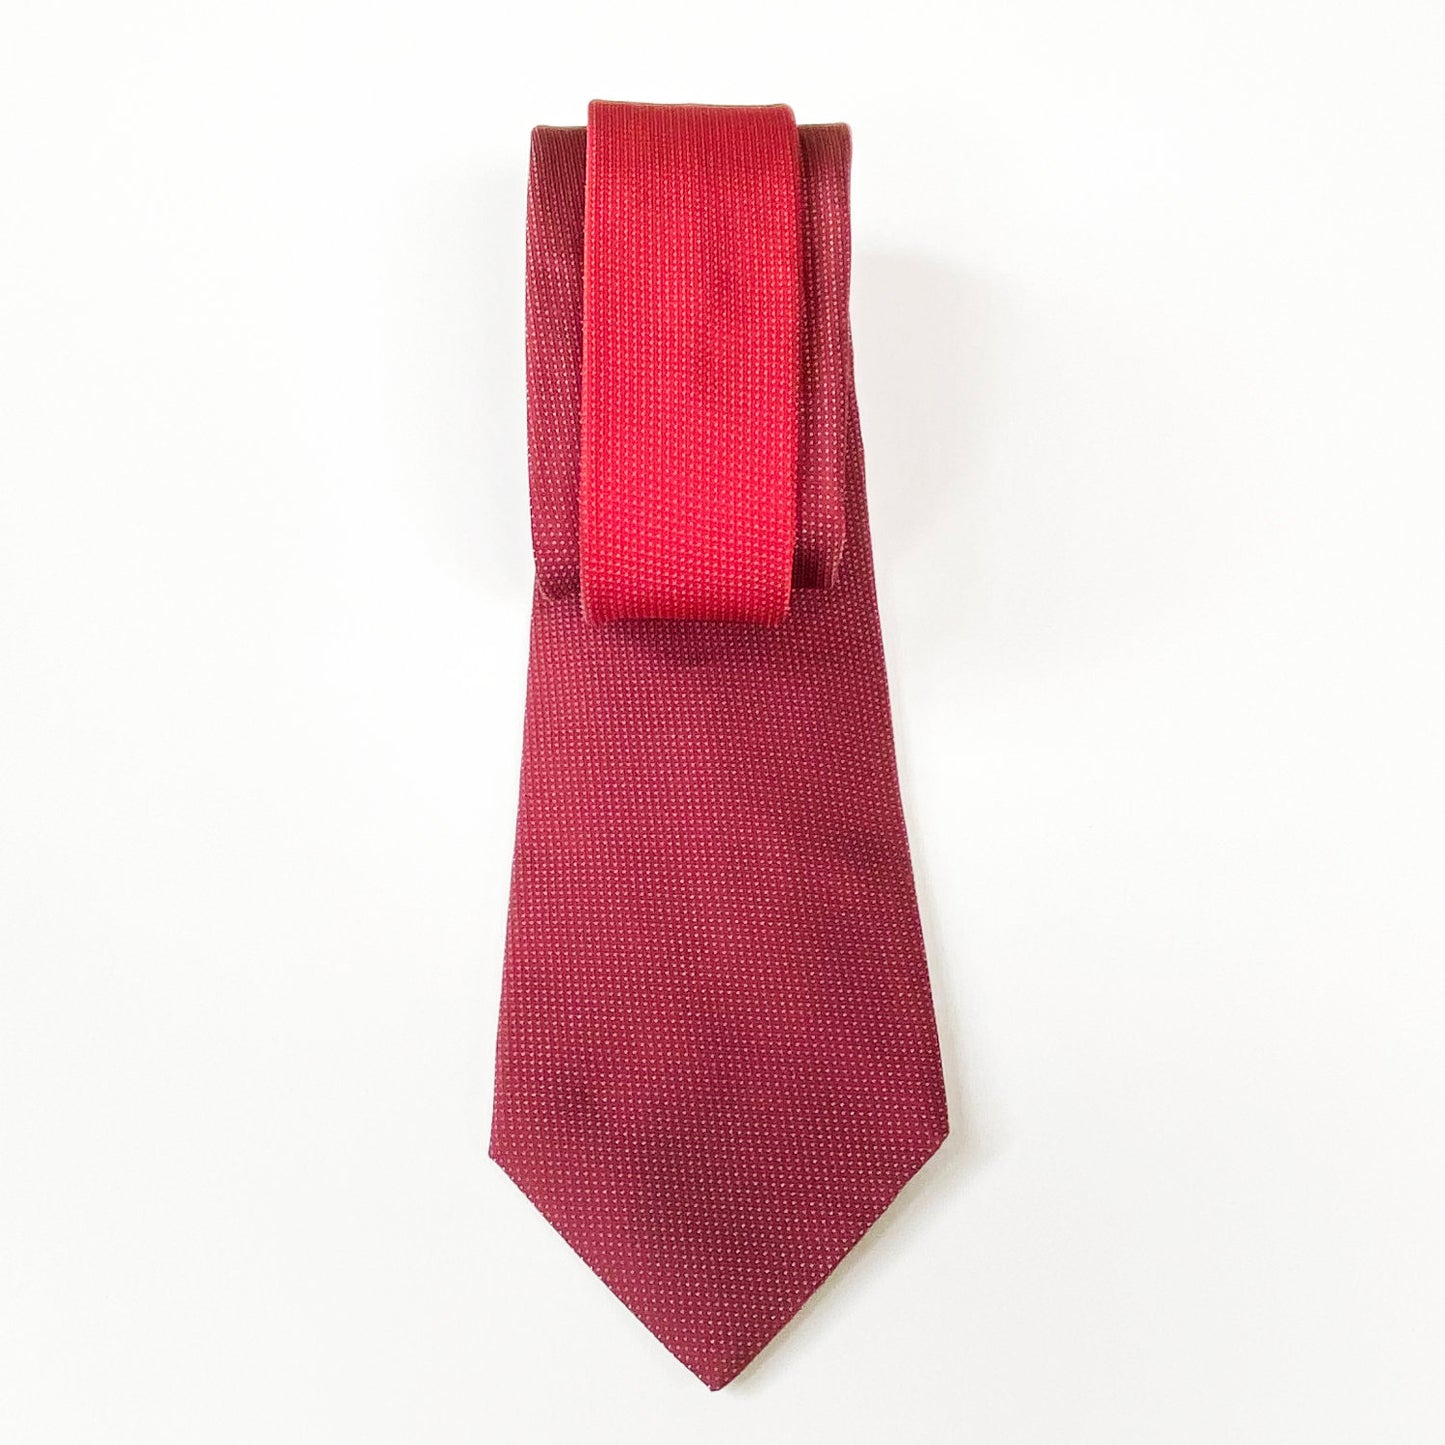 te pluste_Iconic Objects_Valentino tie vintage great condition